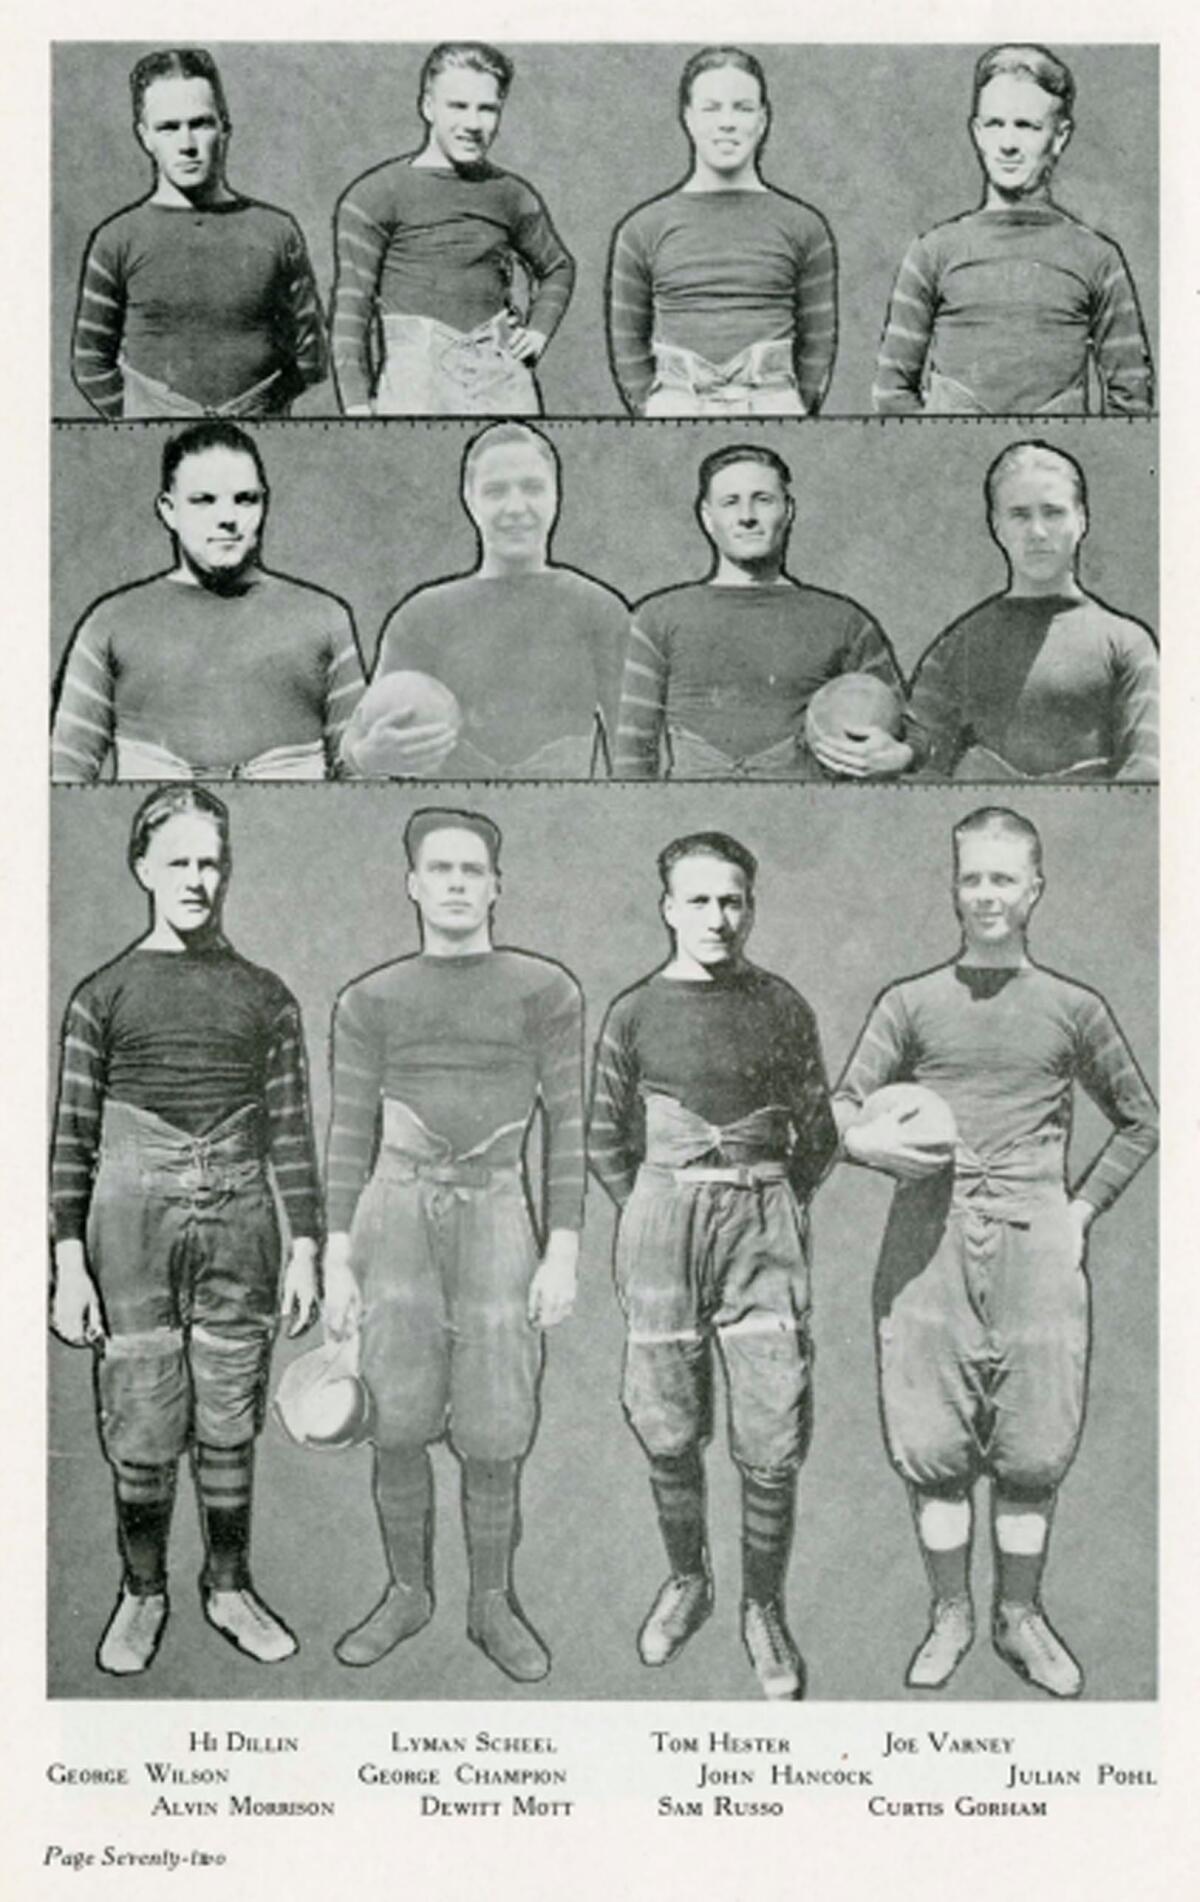 Members of San Diego State's 1921 football team were pictured on page 72 of Del Sudoeste, the school's 1922 yearbook.